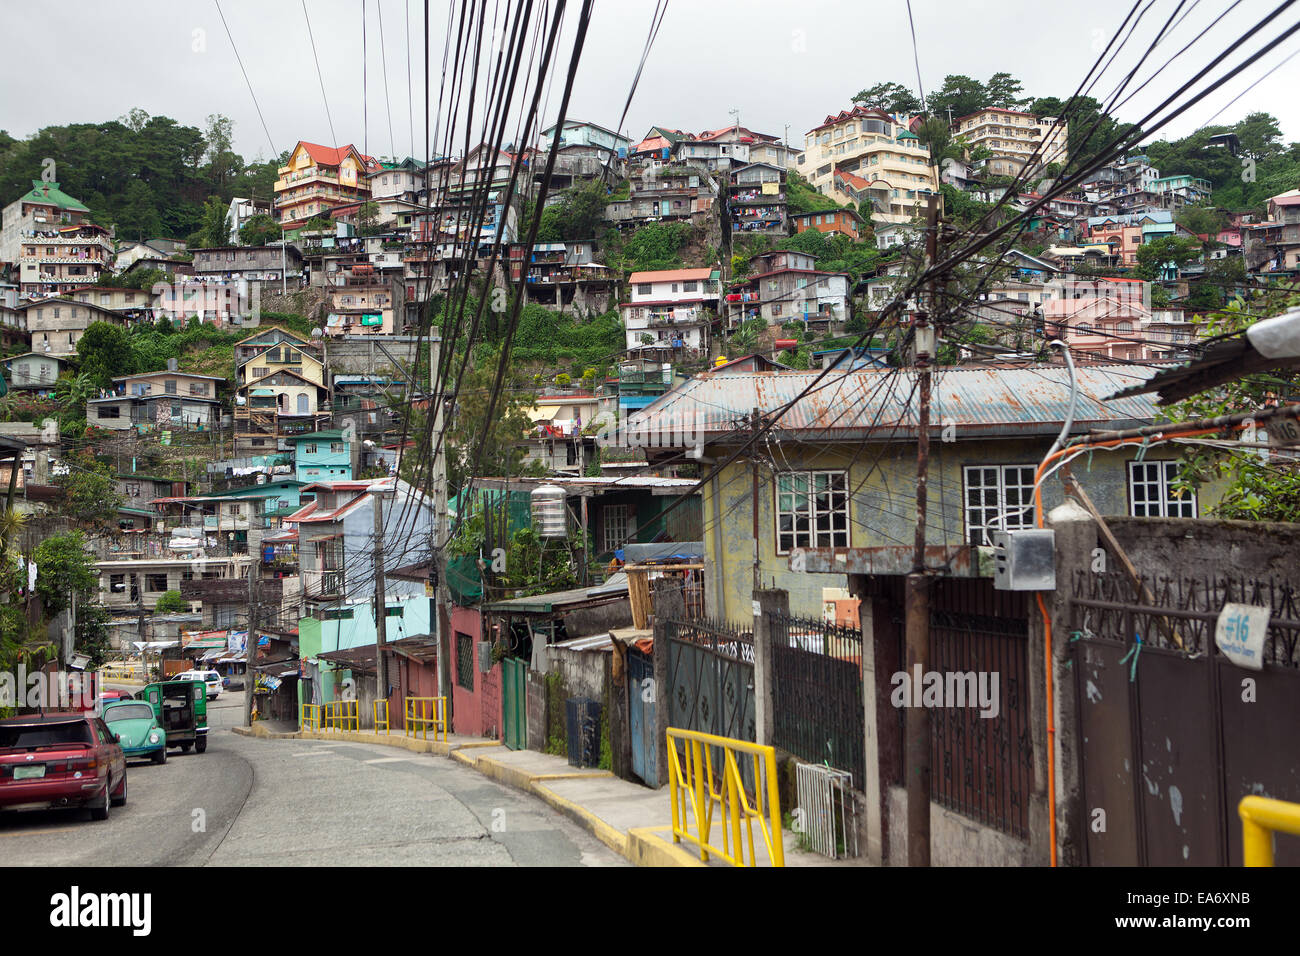 Congested housing in Baguio City, Philippines. Stock Photo